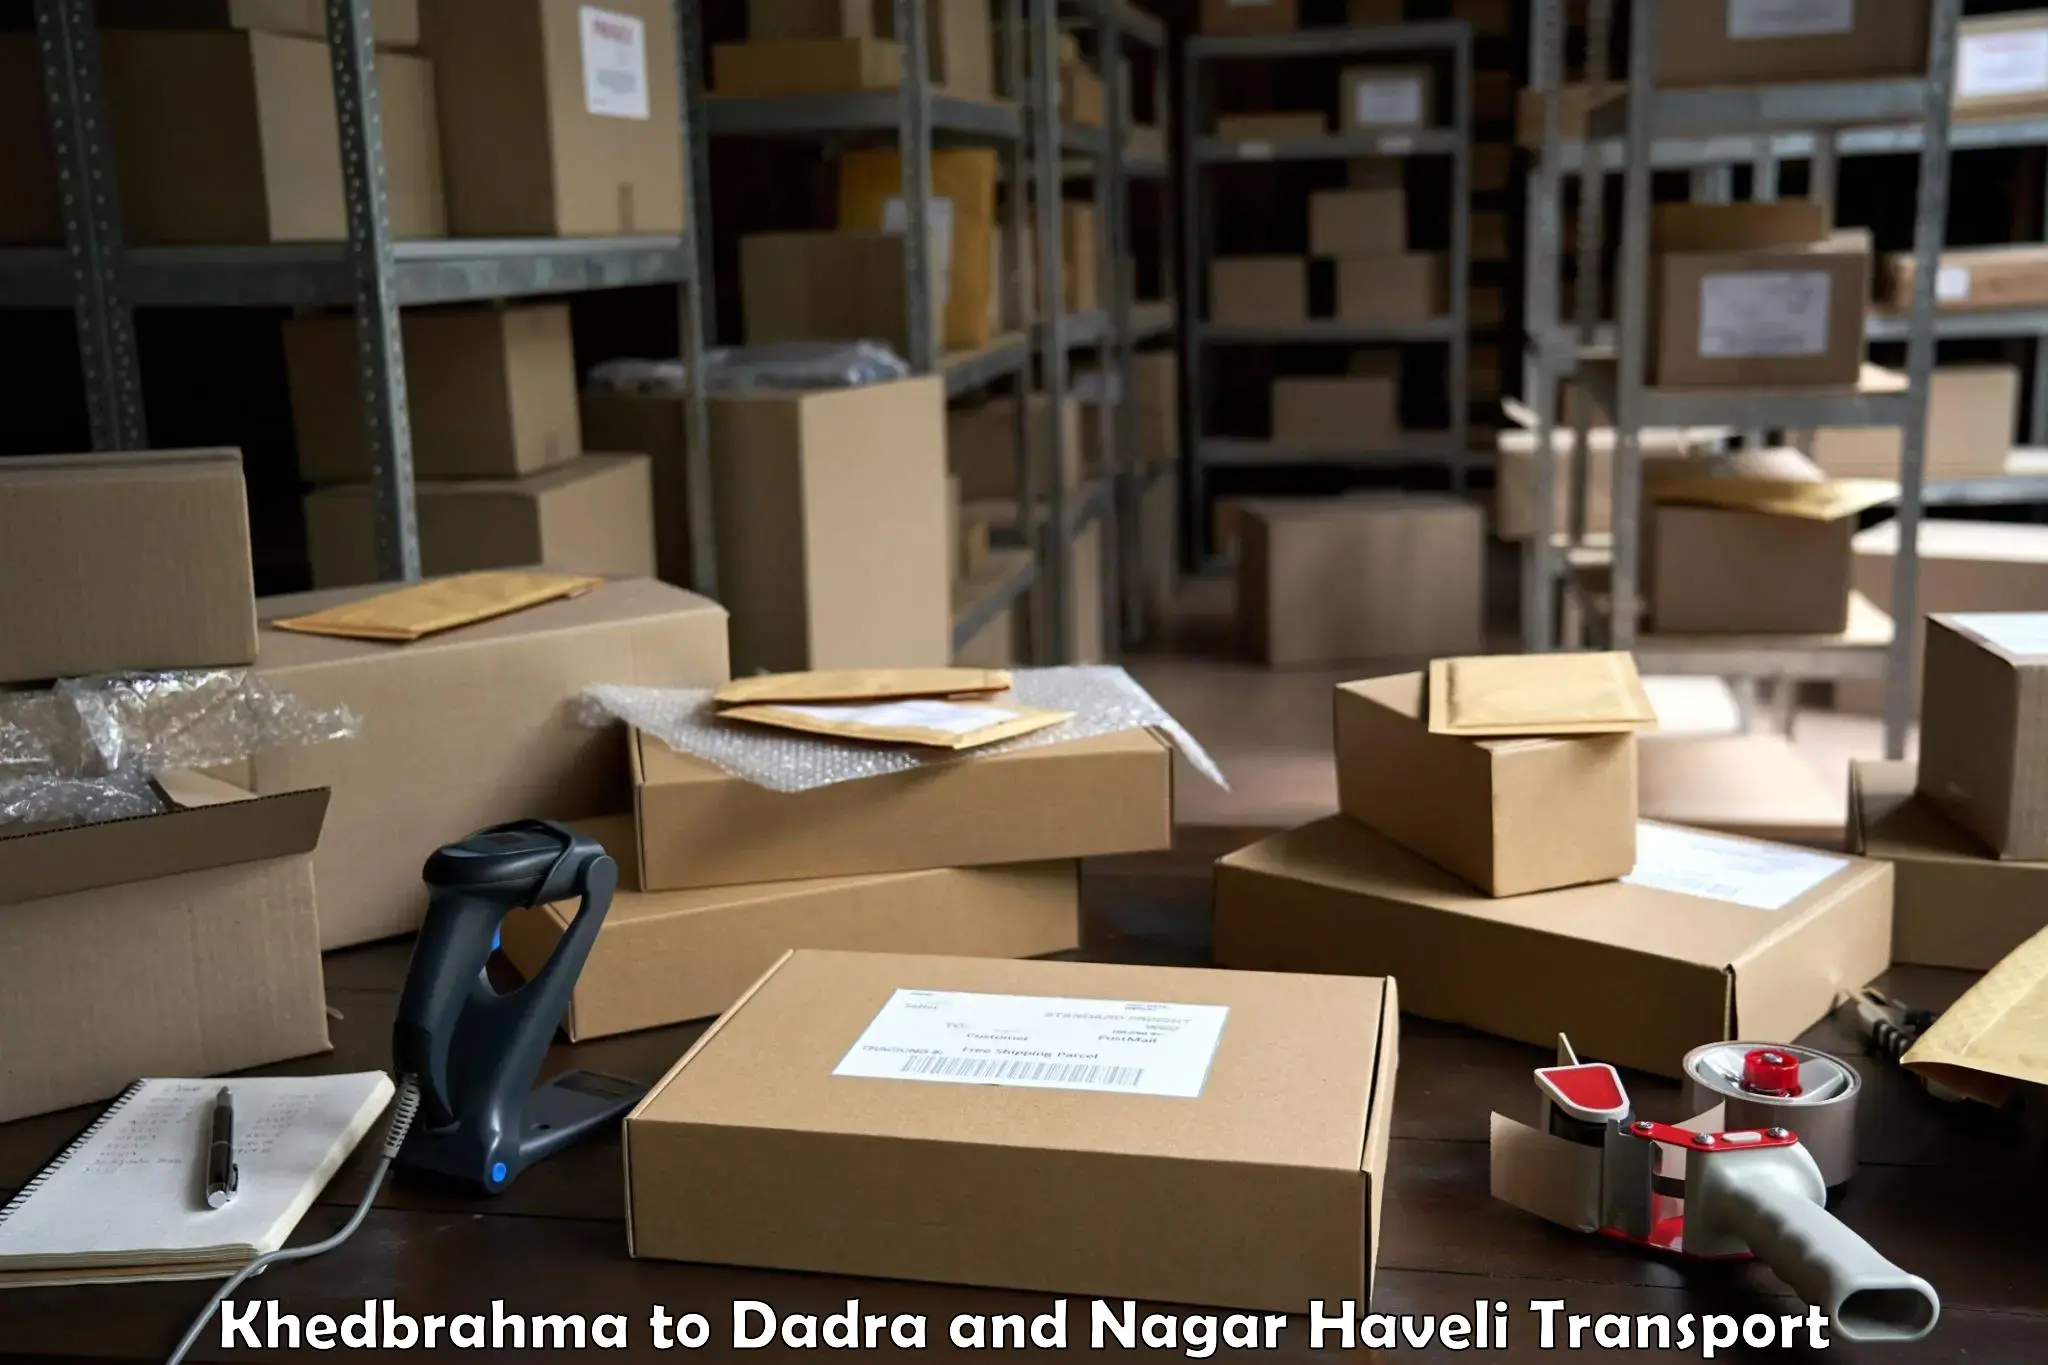 Goods delivery service Khedbrahma to Dadra and Nagar Haveli